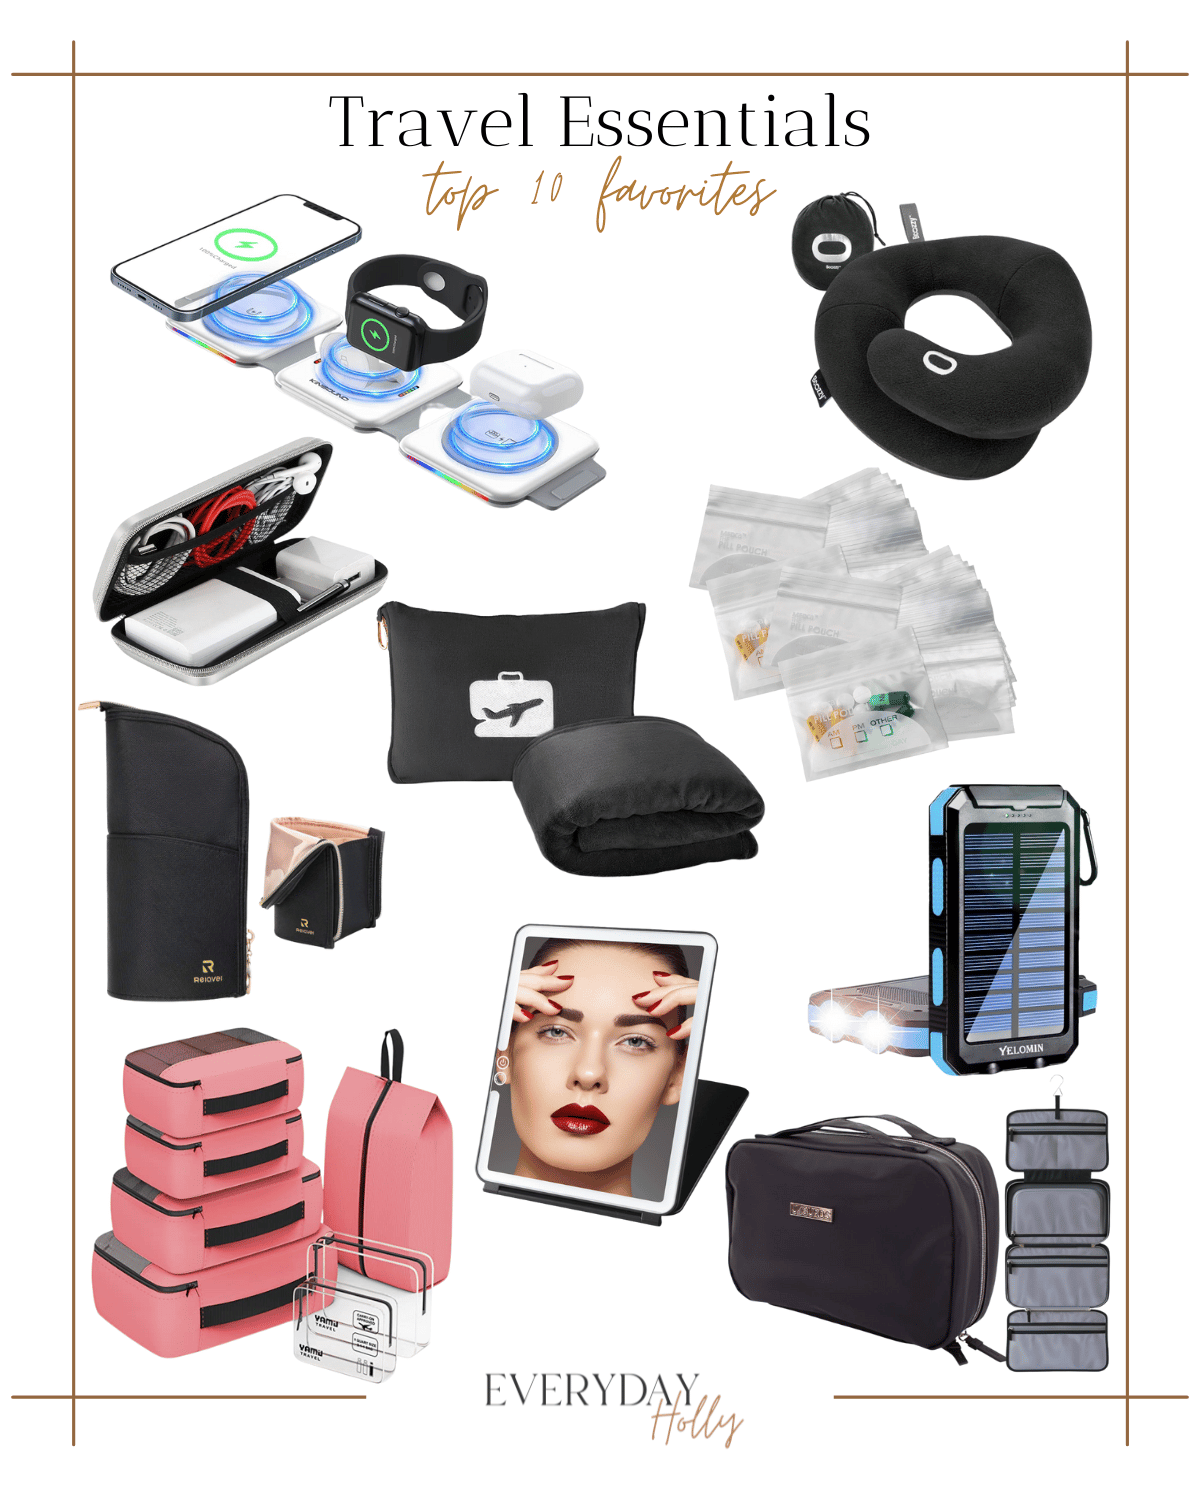 travel essentials, top 10 packing items, carry on, travel items, portable chargers, pillows and blankets, neck pillow, plane essentials, travel bag 